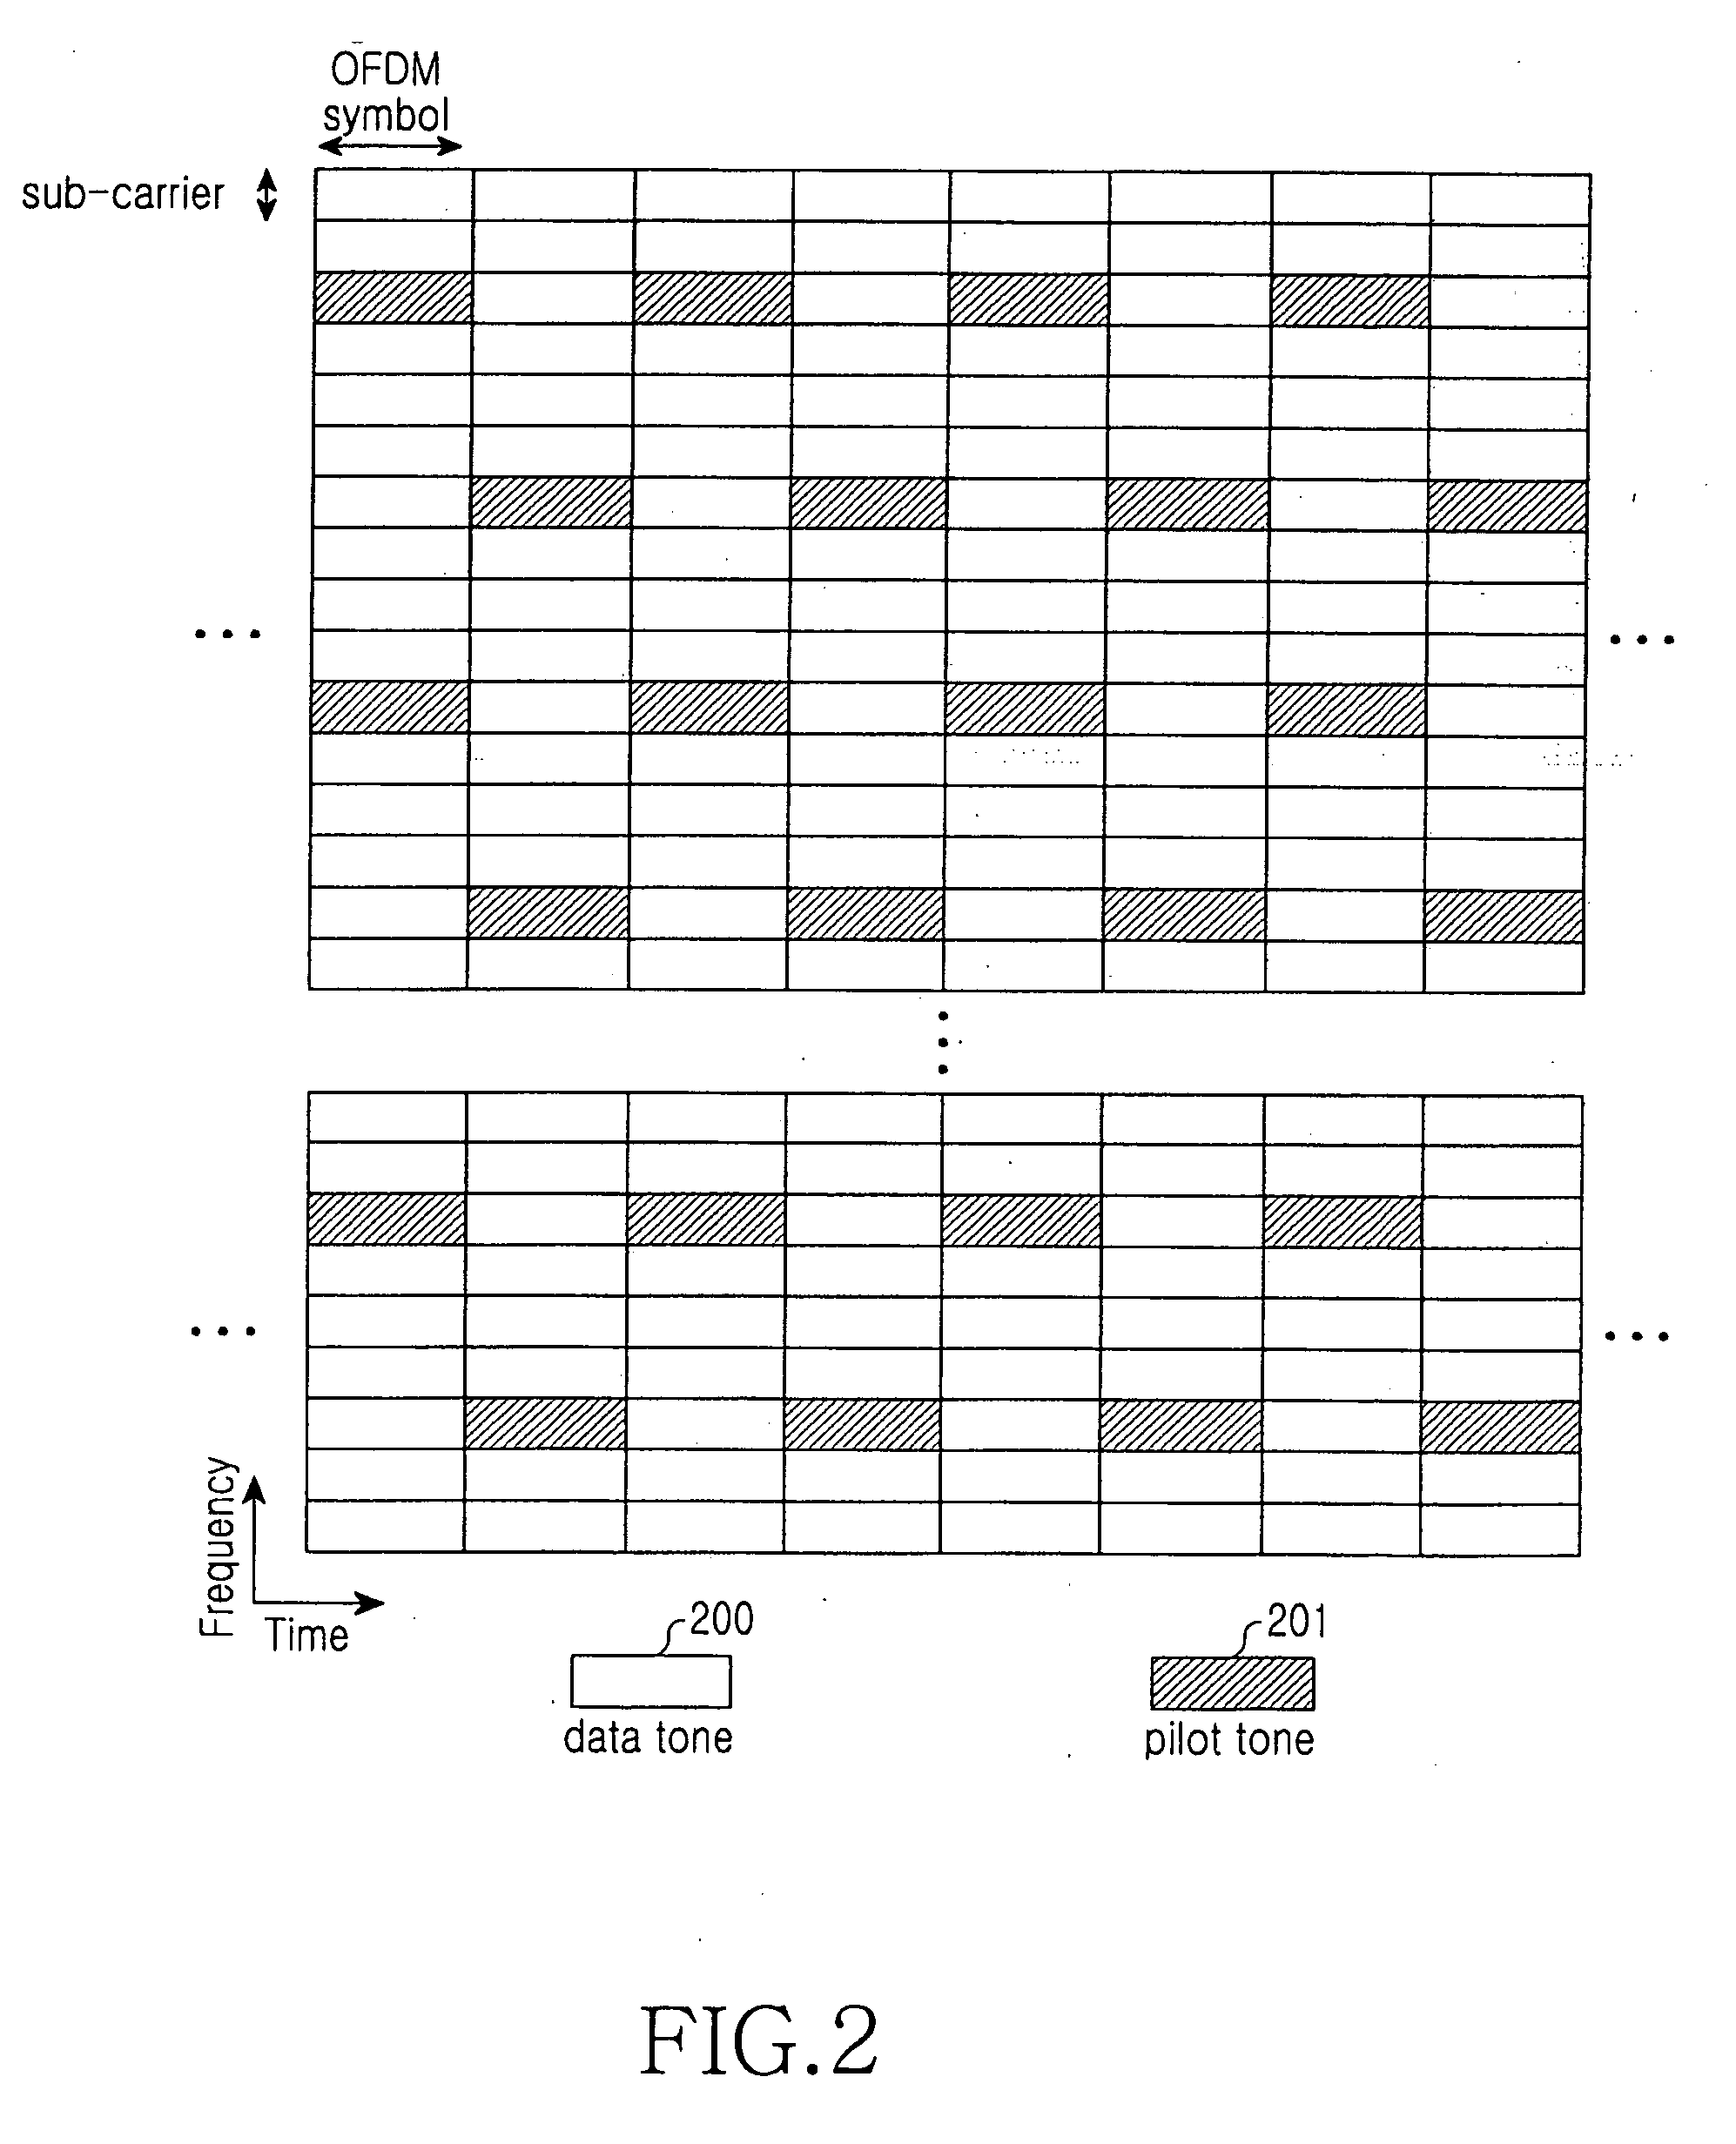 Apparatus and method for transmitting and receiving pilot signal using multiple antennas in a mobile communication system